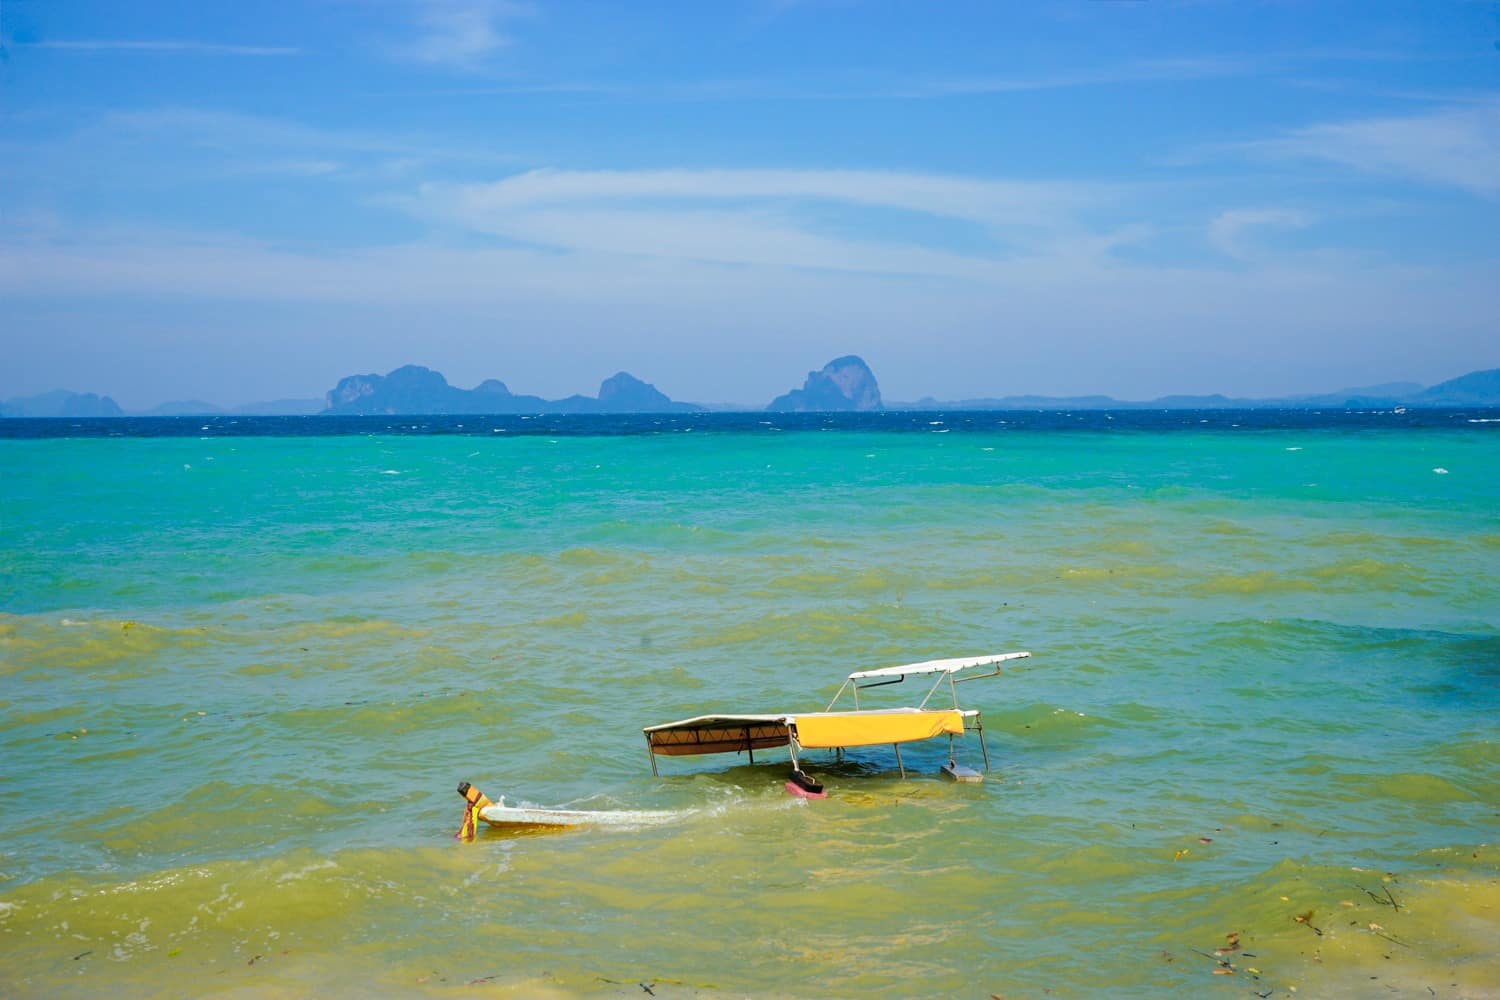 Sinking longtail boat in Thailand